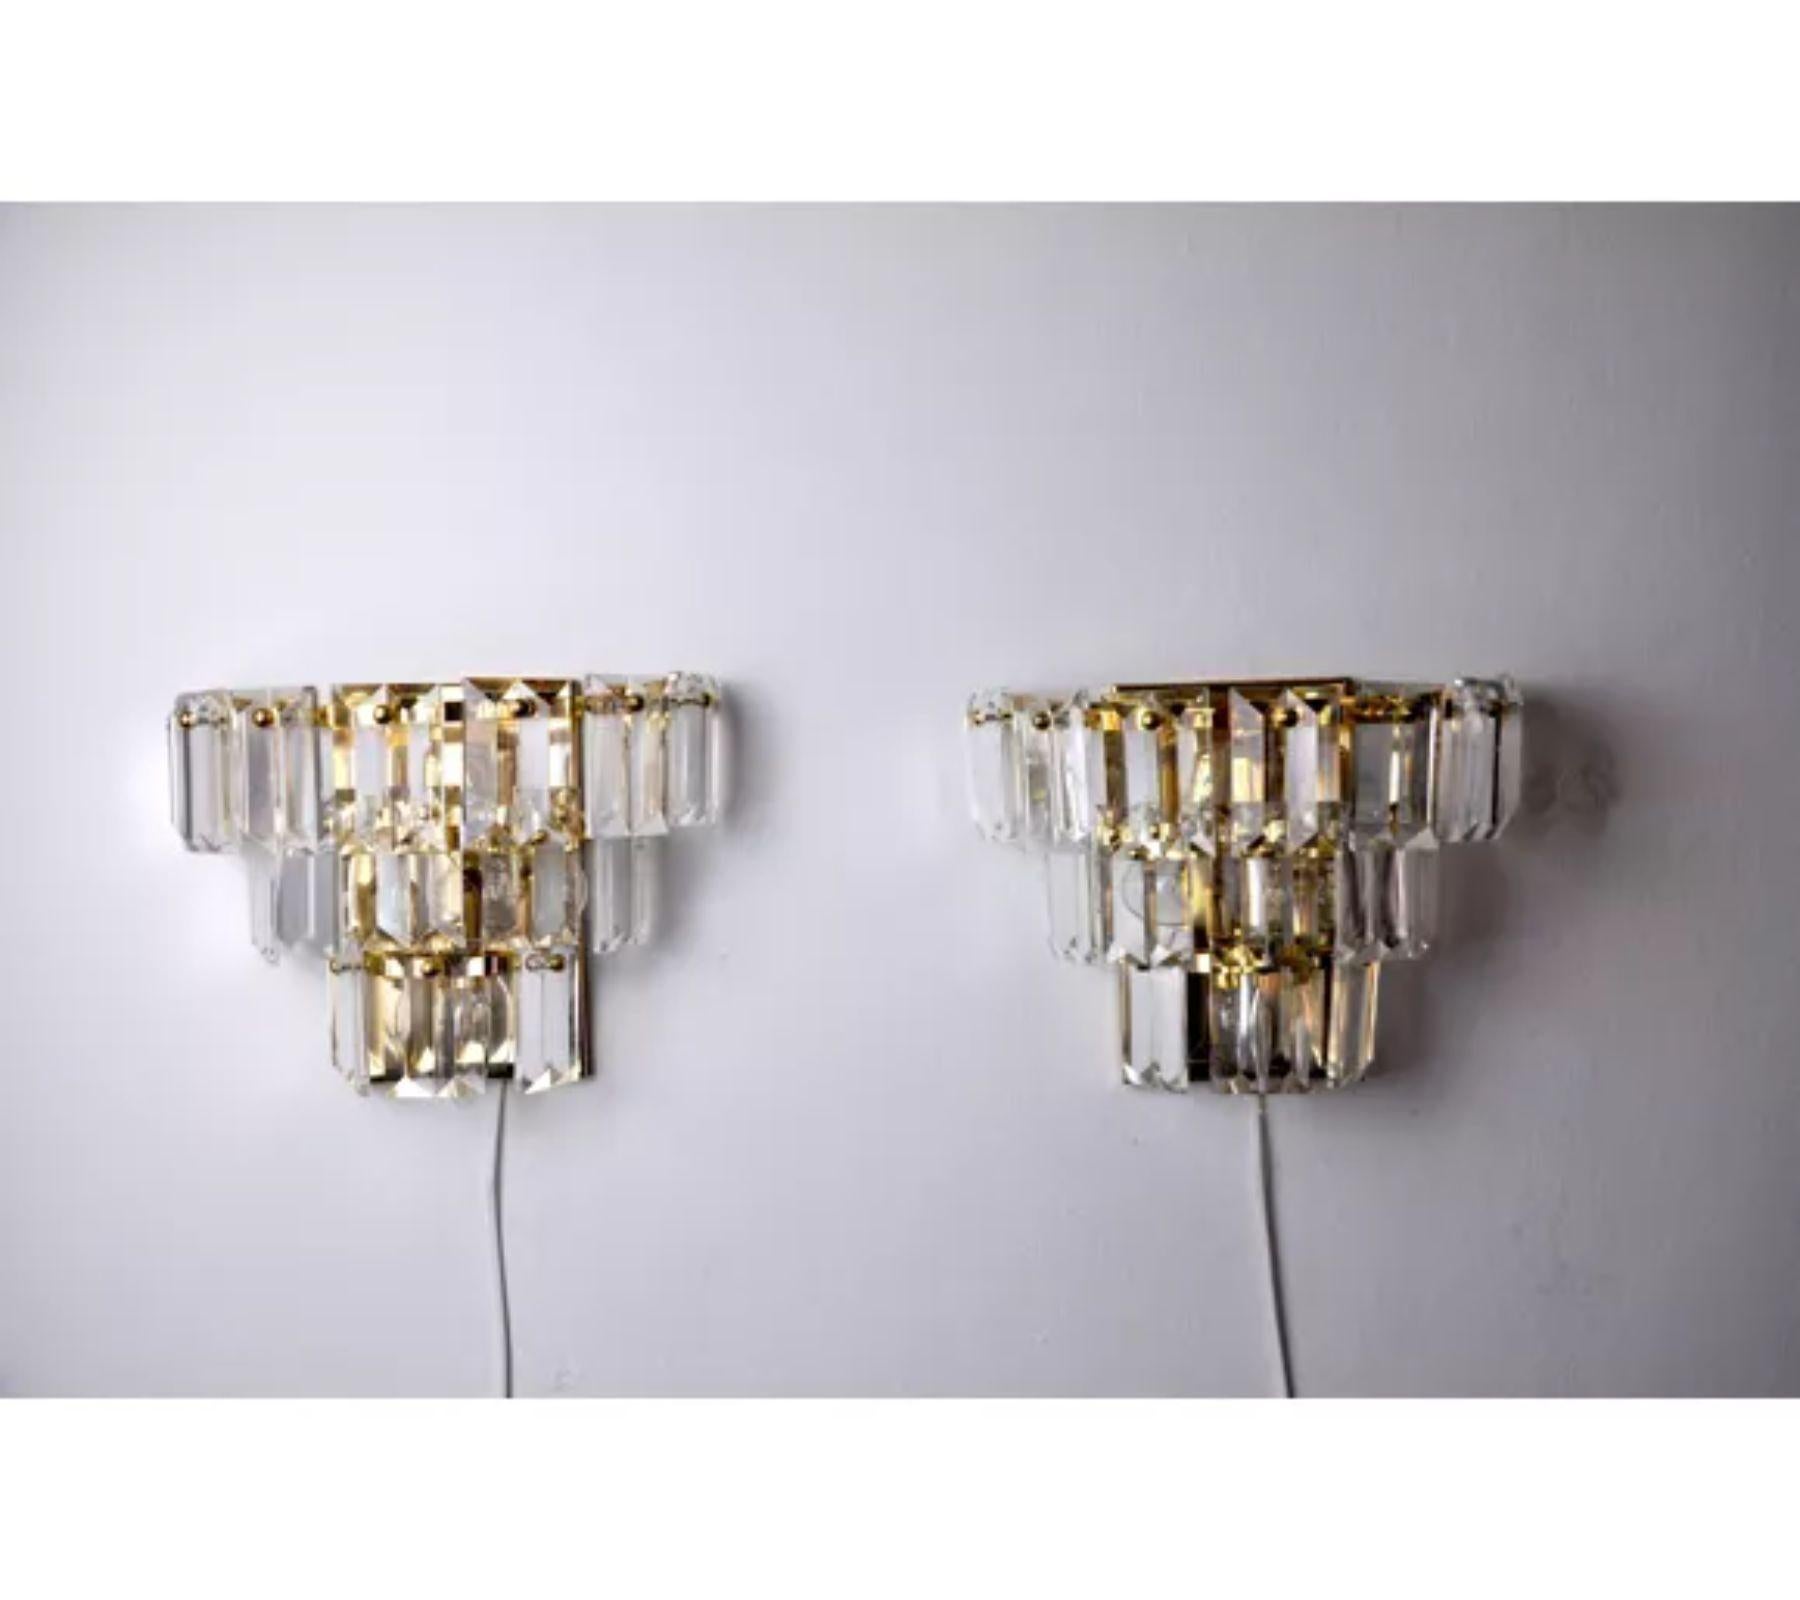 Very nice pair of Kinkeldey wall lights designed and produced in Germany in the 1970s. Very nice design object that will illuminate your interior wonderfully. Electricity checked, marks of time relating to the age of the object.